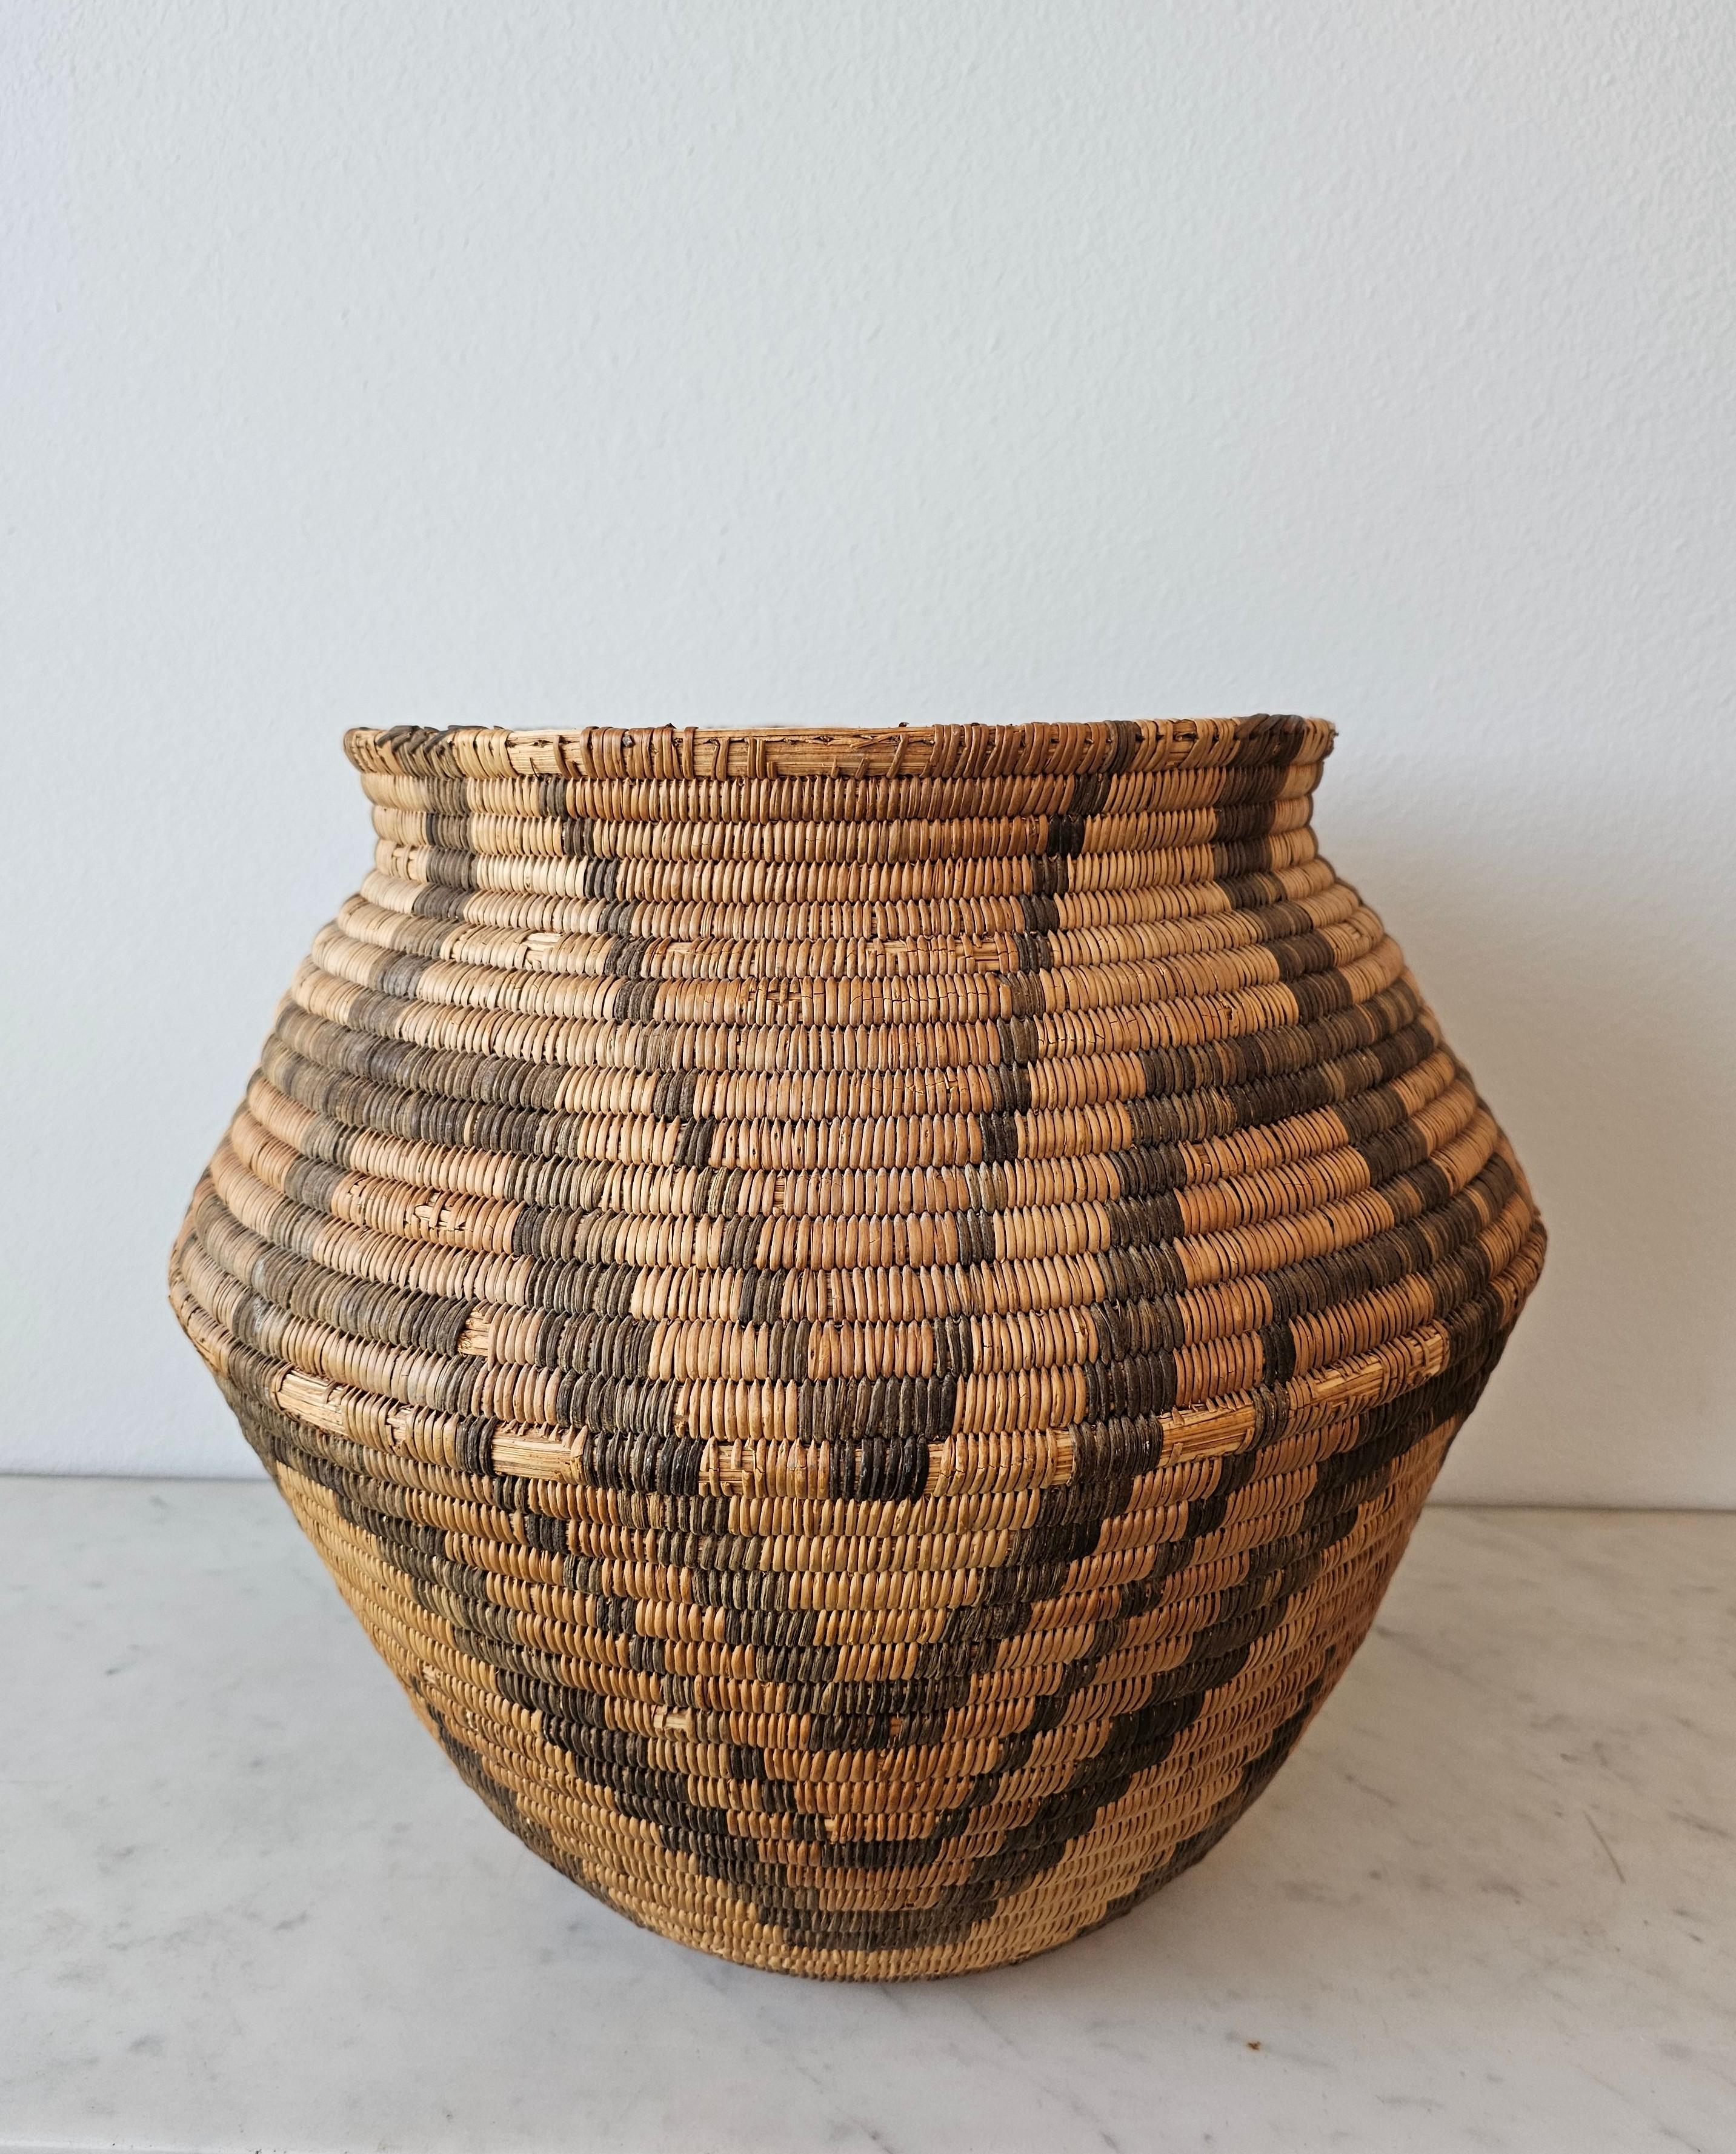 Antique Apache Olla Jar Coiled Willow Wicker Devil's Claw Basket  For Sale 2